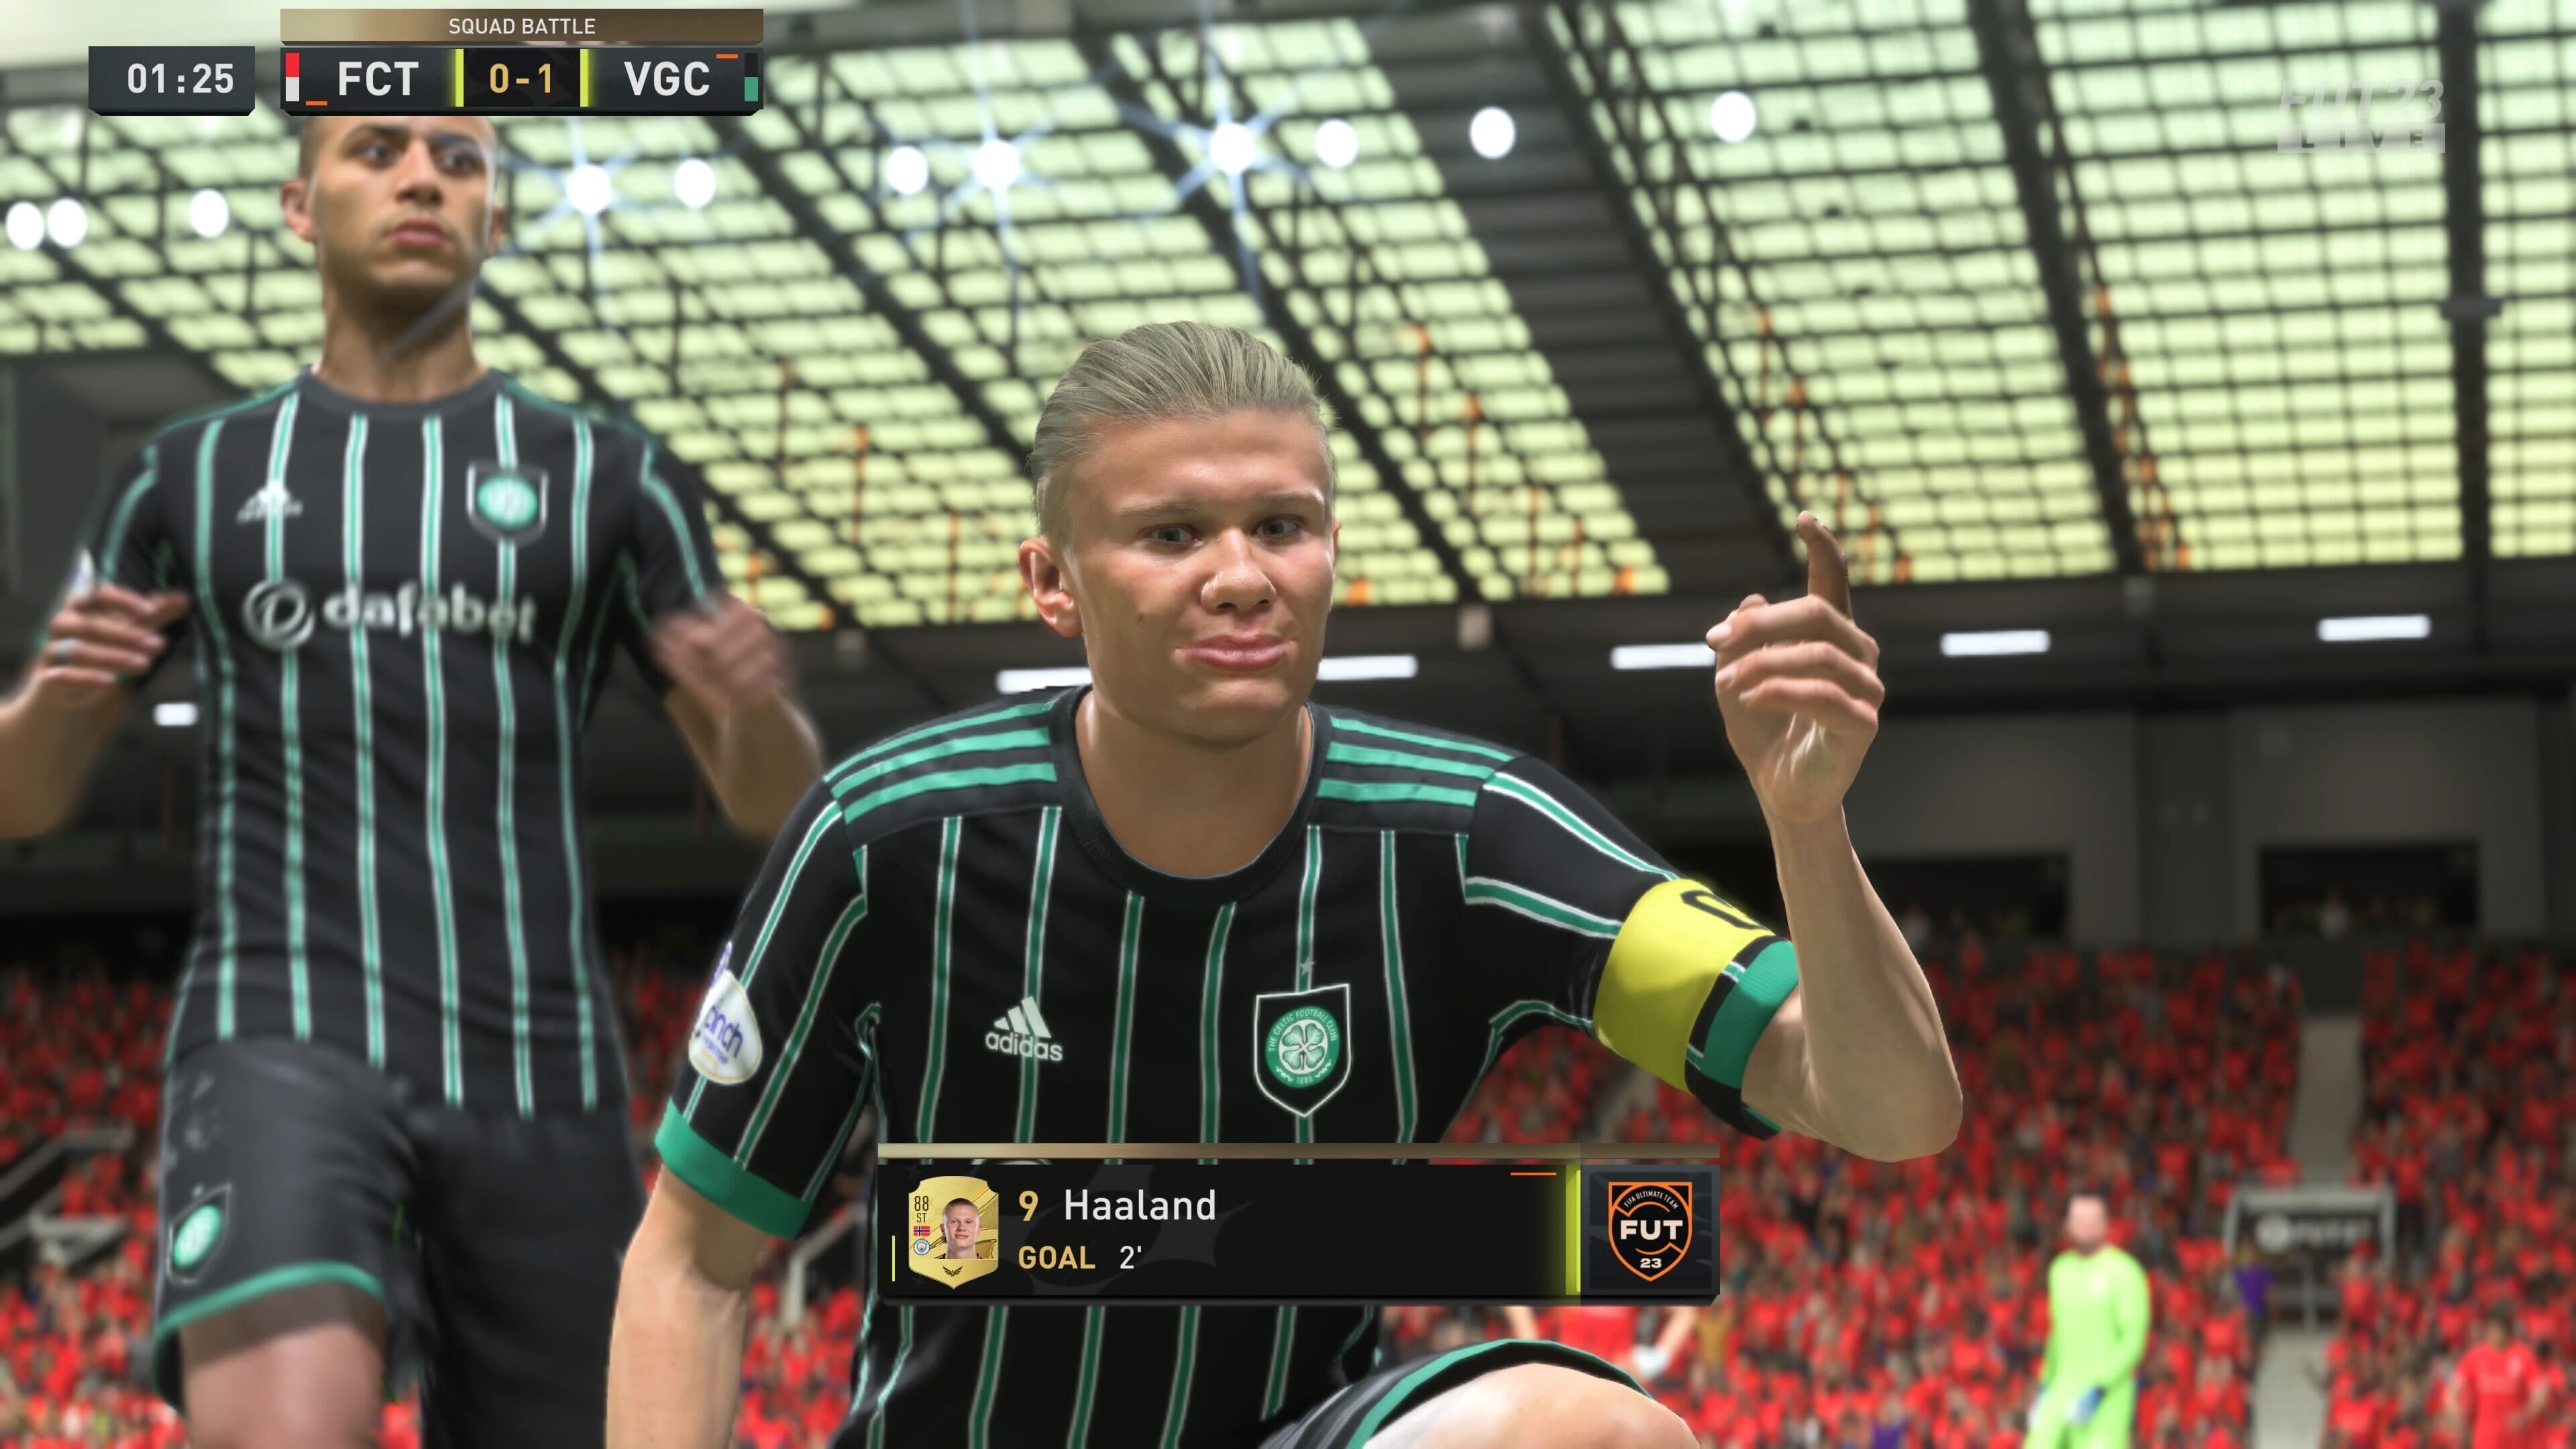 Lengthy FIFA players - The best lengthy players in FIFA 23